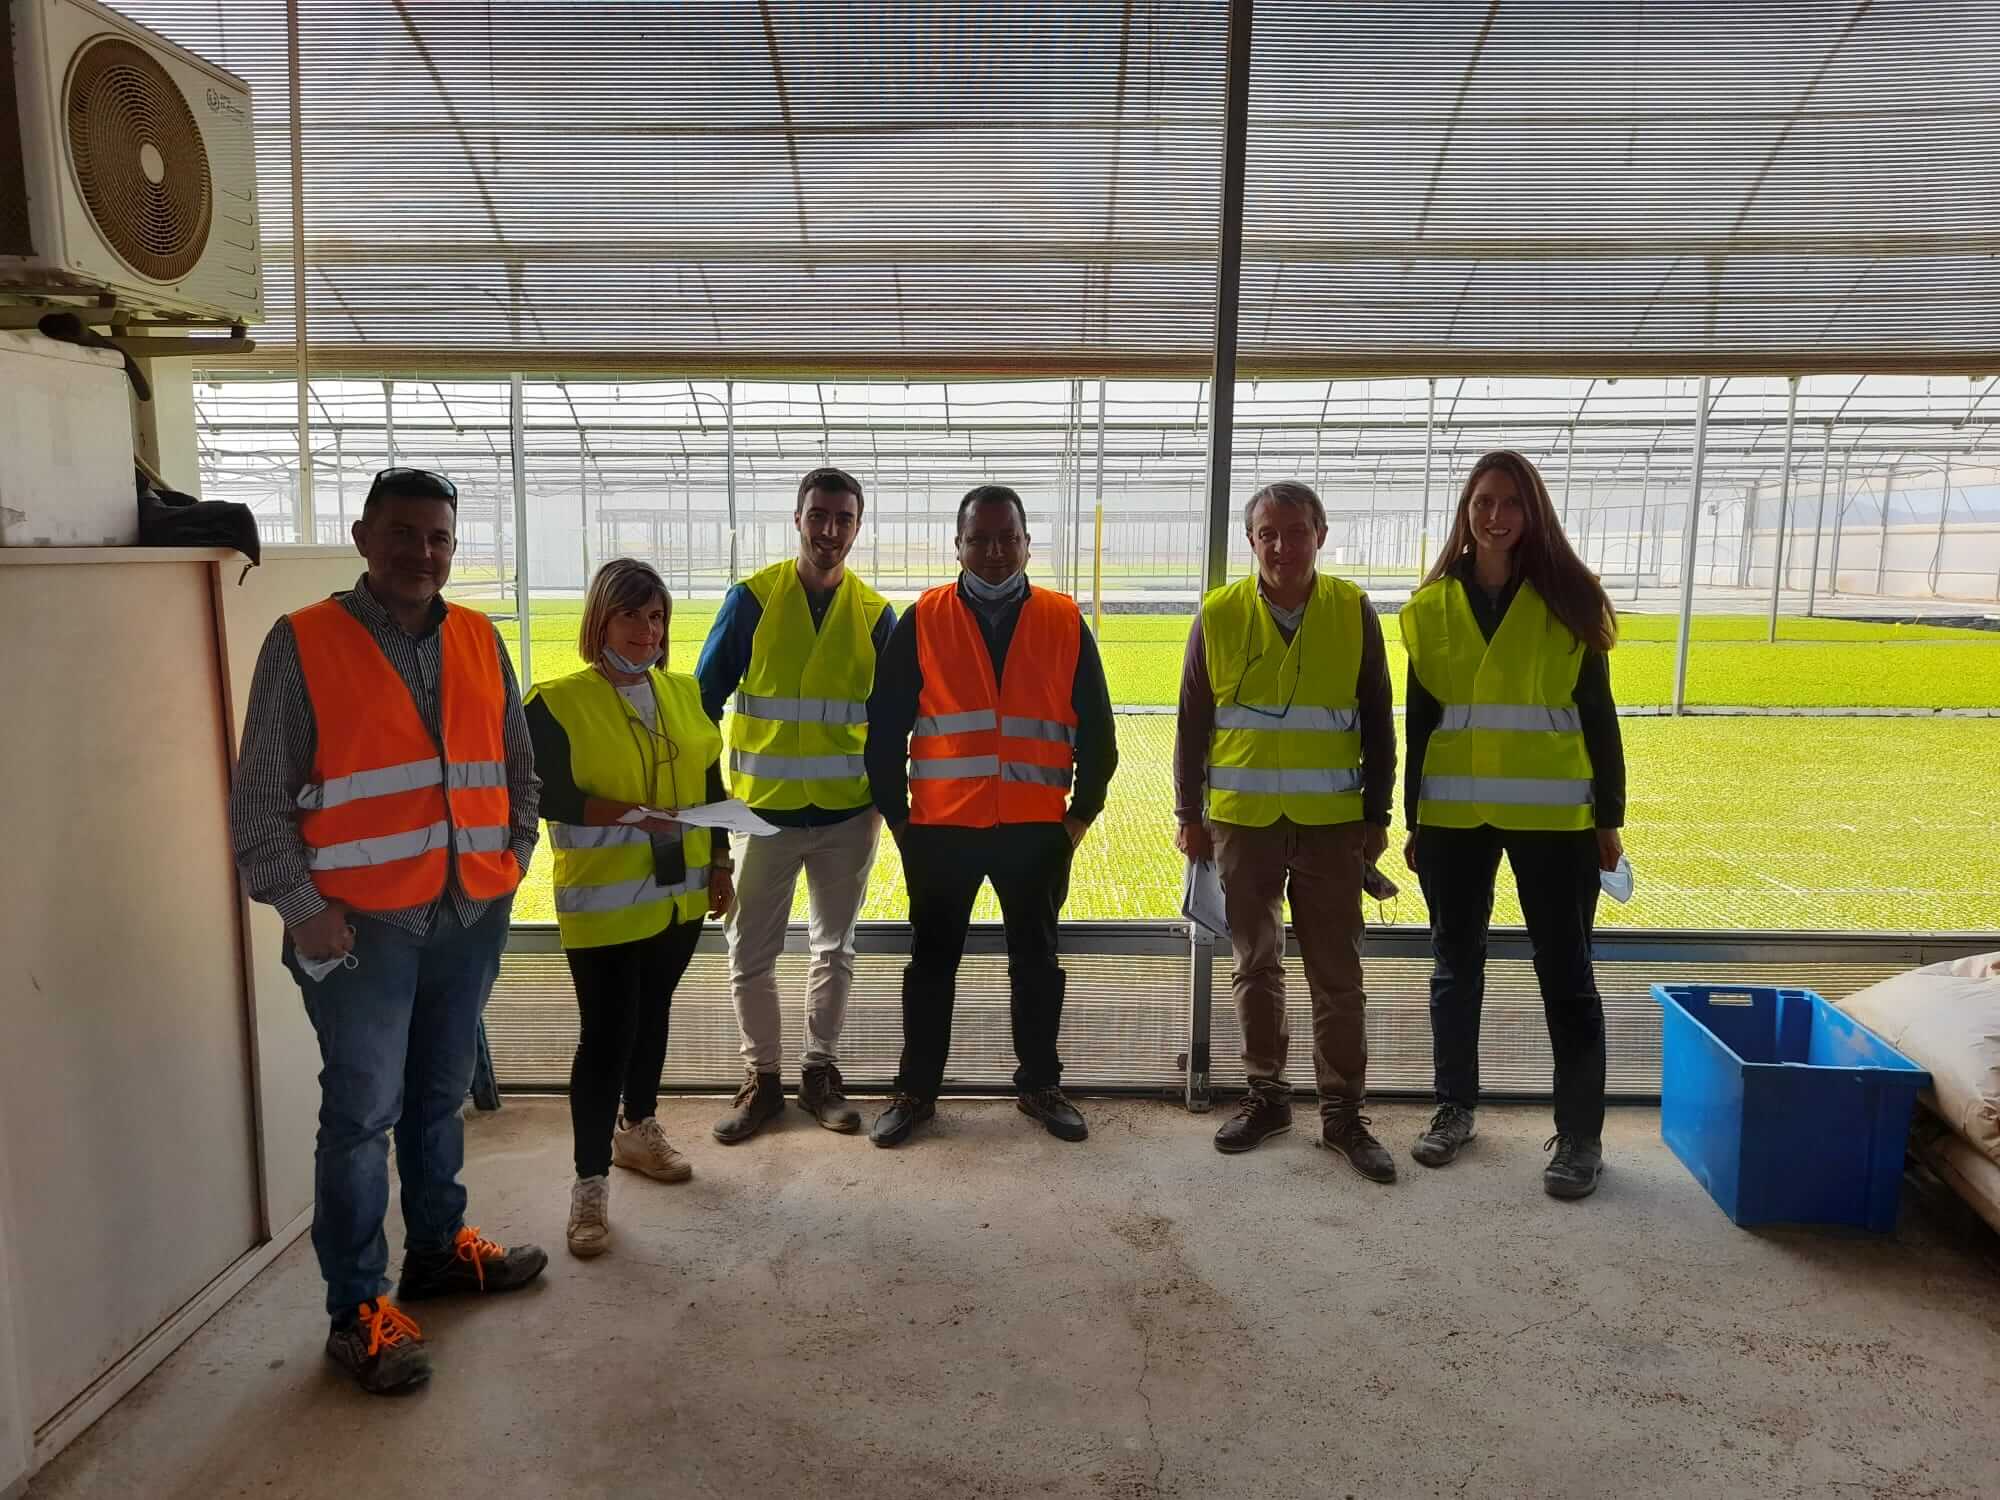 Visit to the Florette greenhouses located in Murcia – November 2021